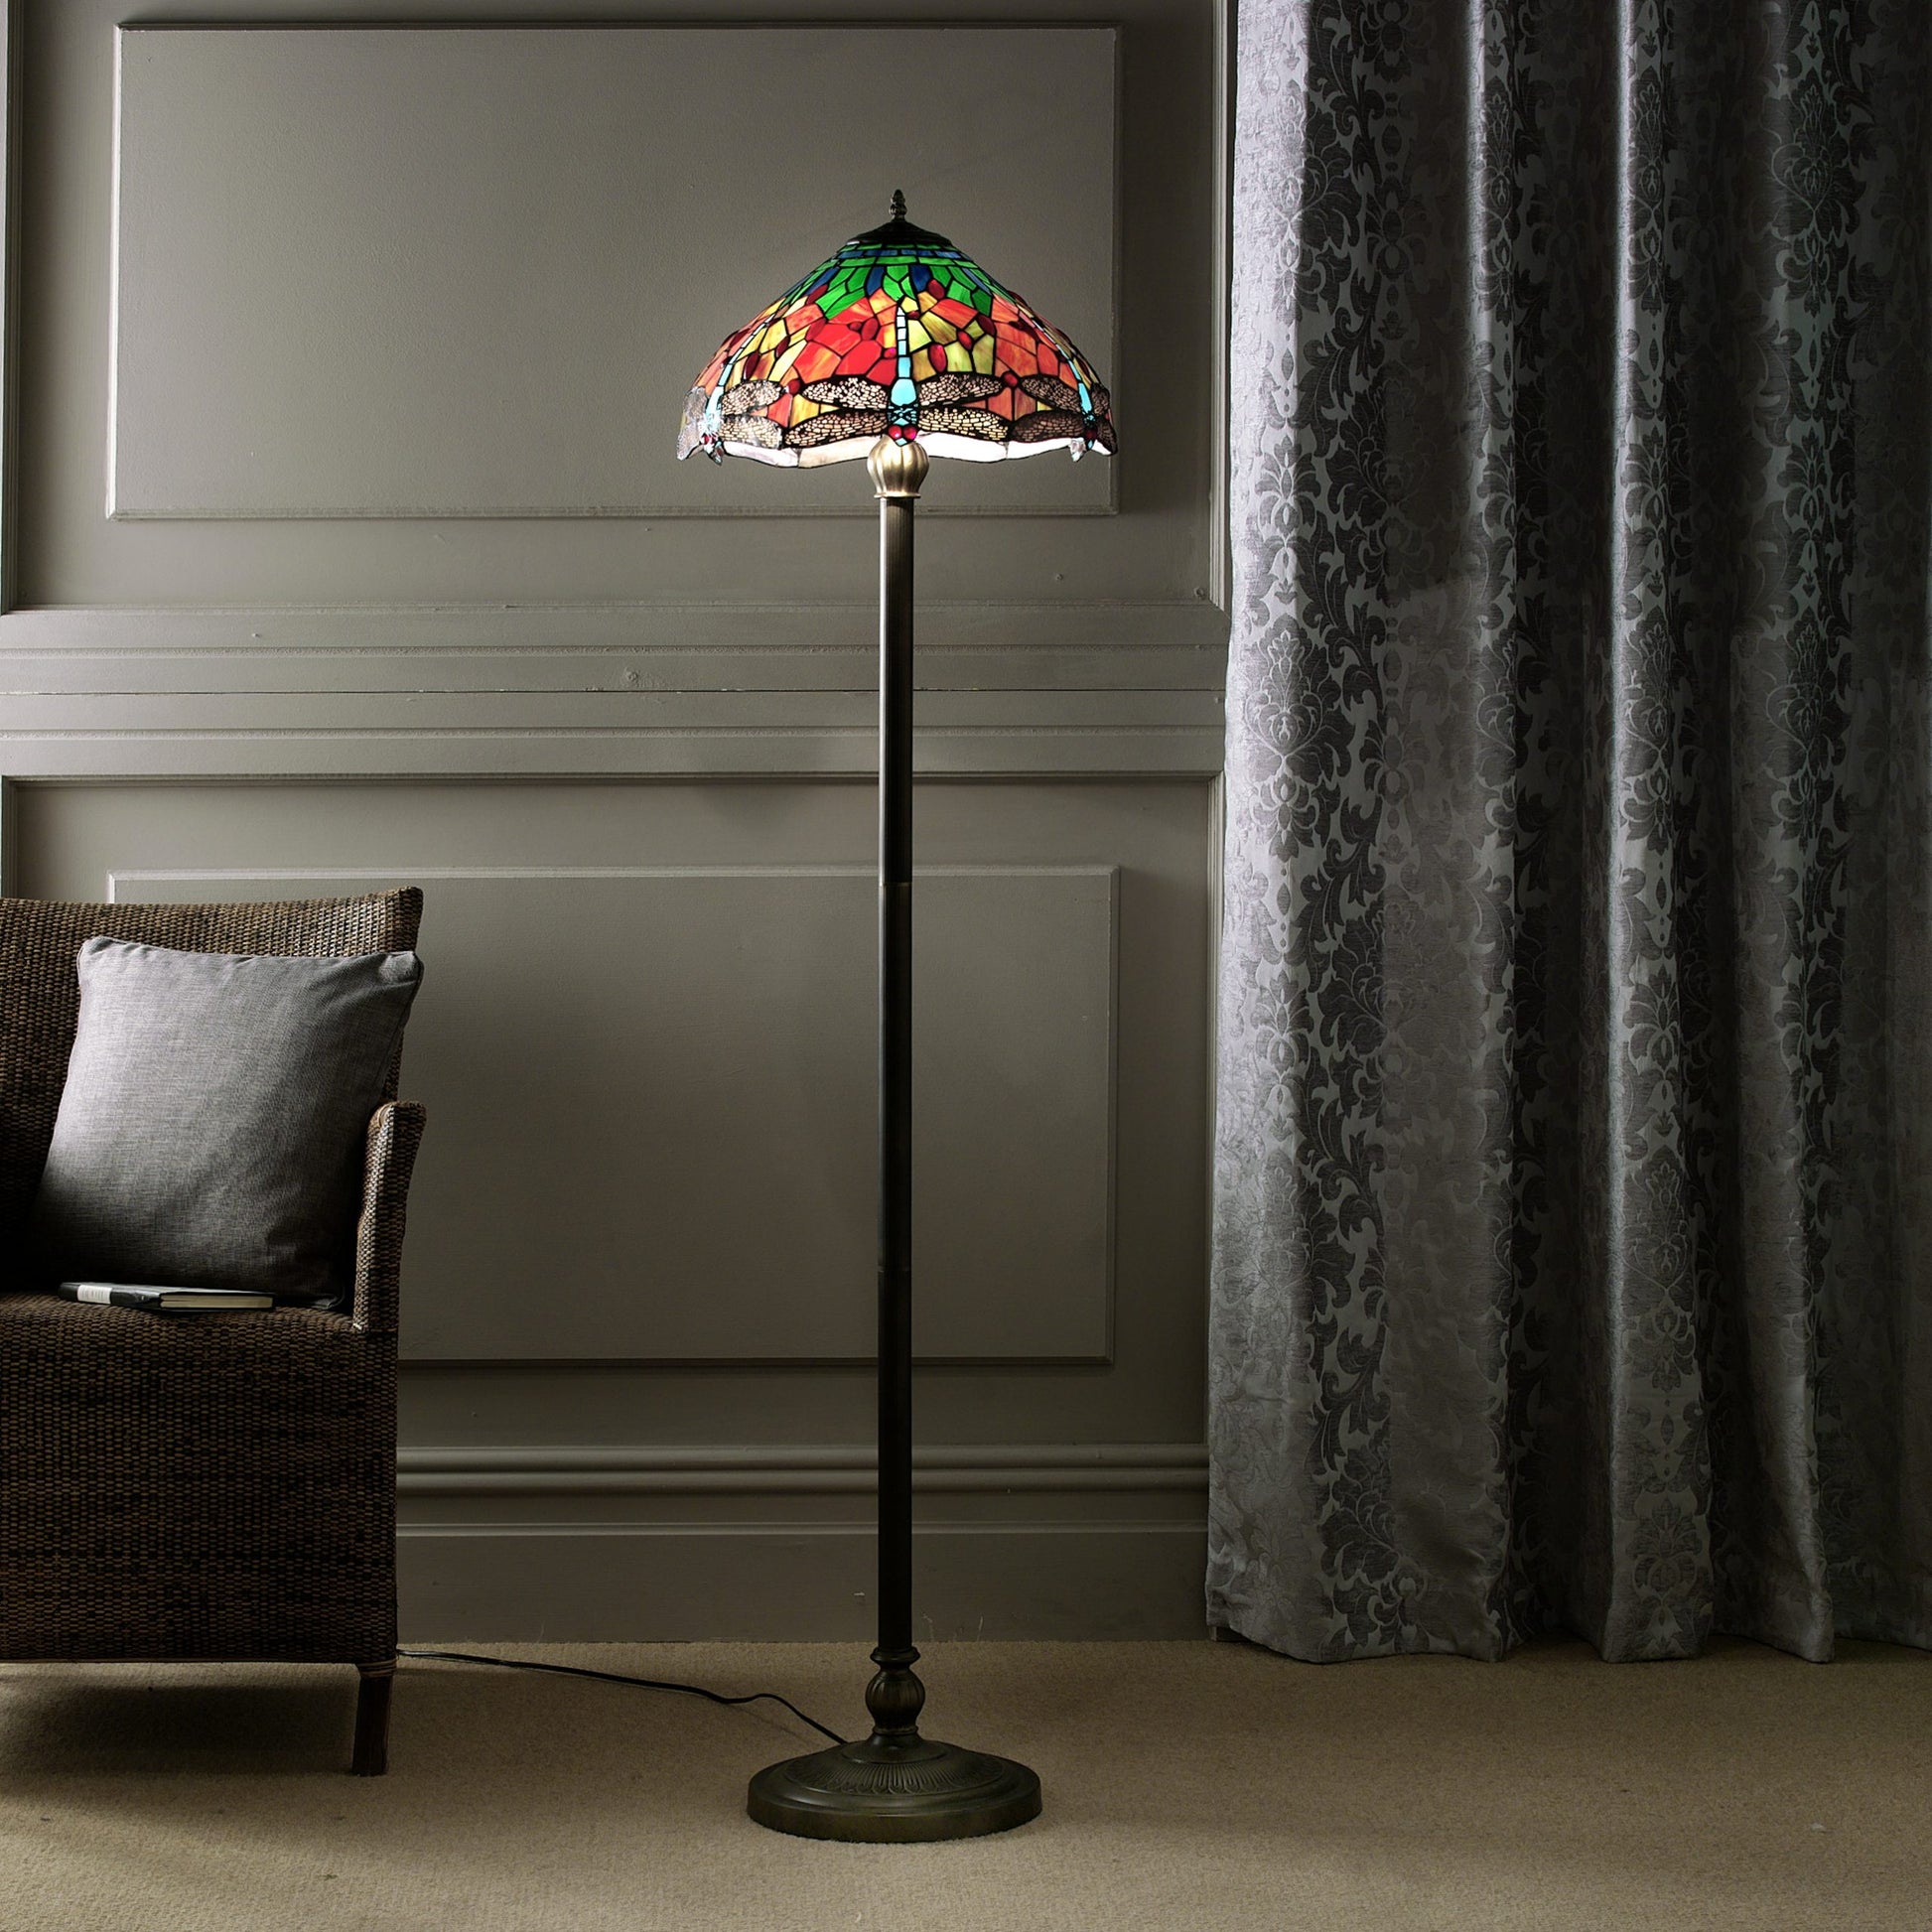 Mitcham Tiffany Style Floor lamp with Stained Glass lampshade effect 150 Cm Floor lamp